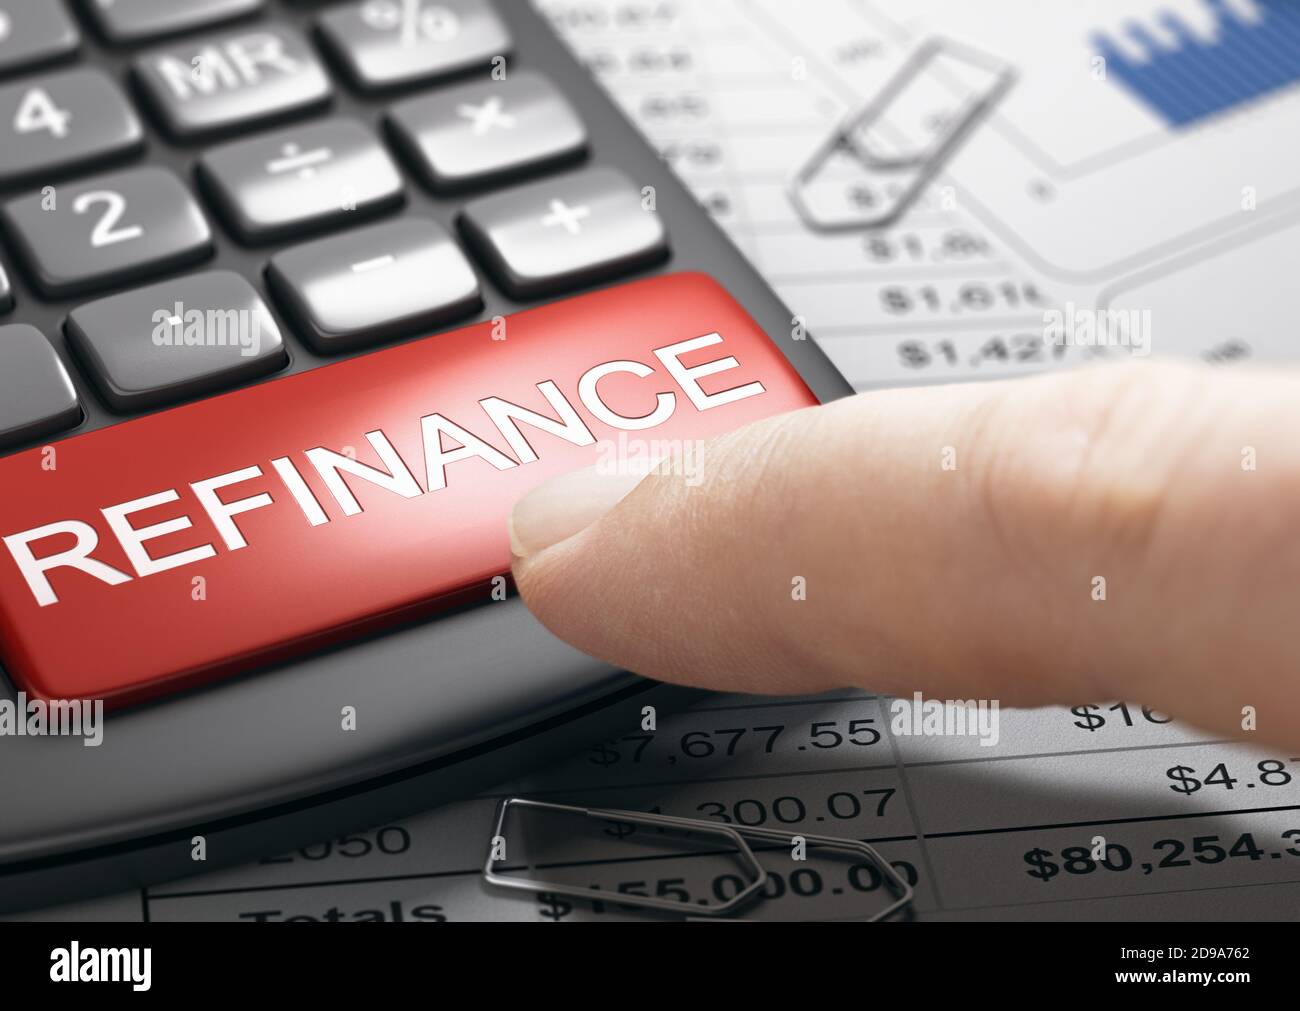 Finger about to press a red button on a conceptual refinance calculator. Concept of bad credit repair. Composite image between a hand photography and Stock Photo